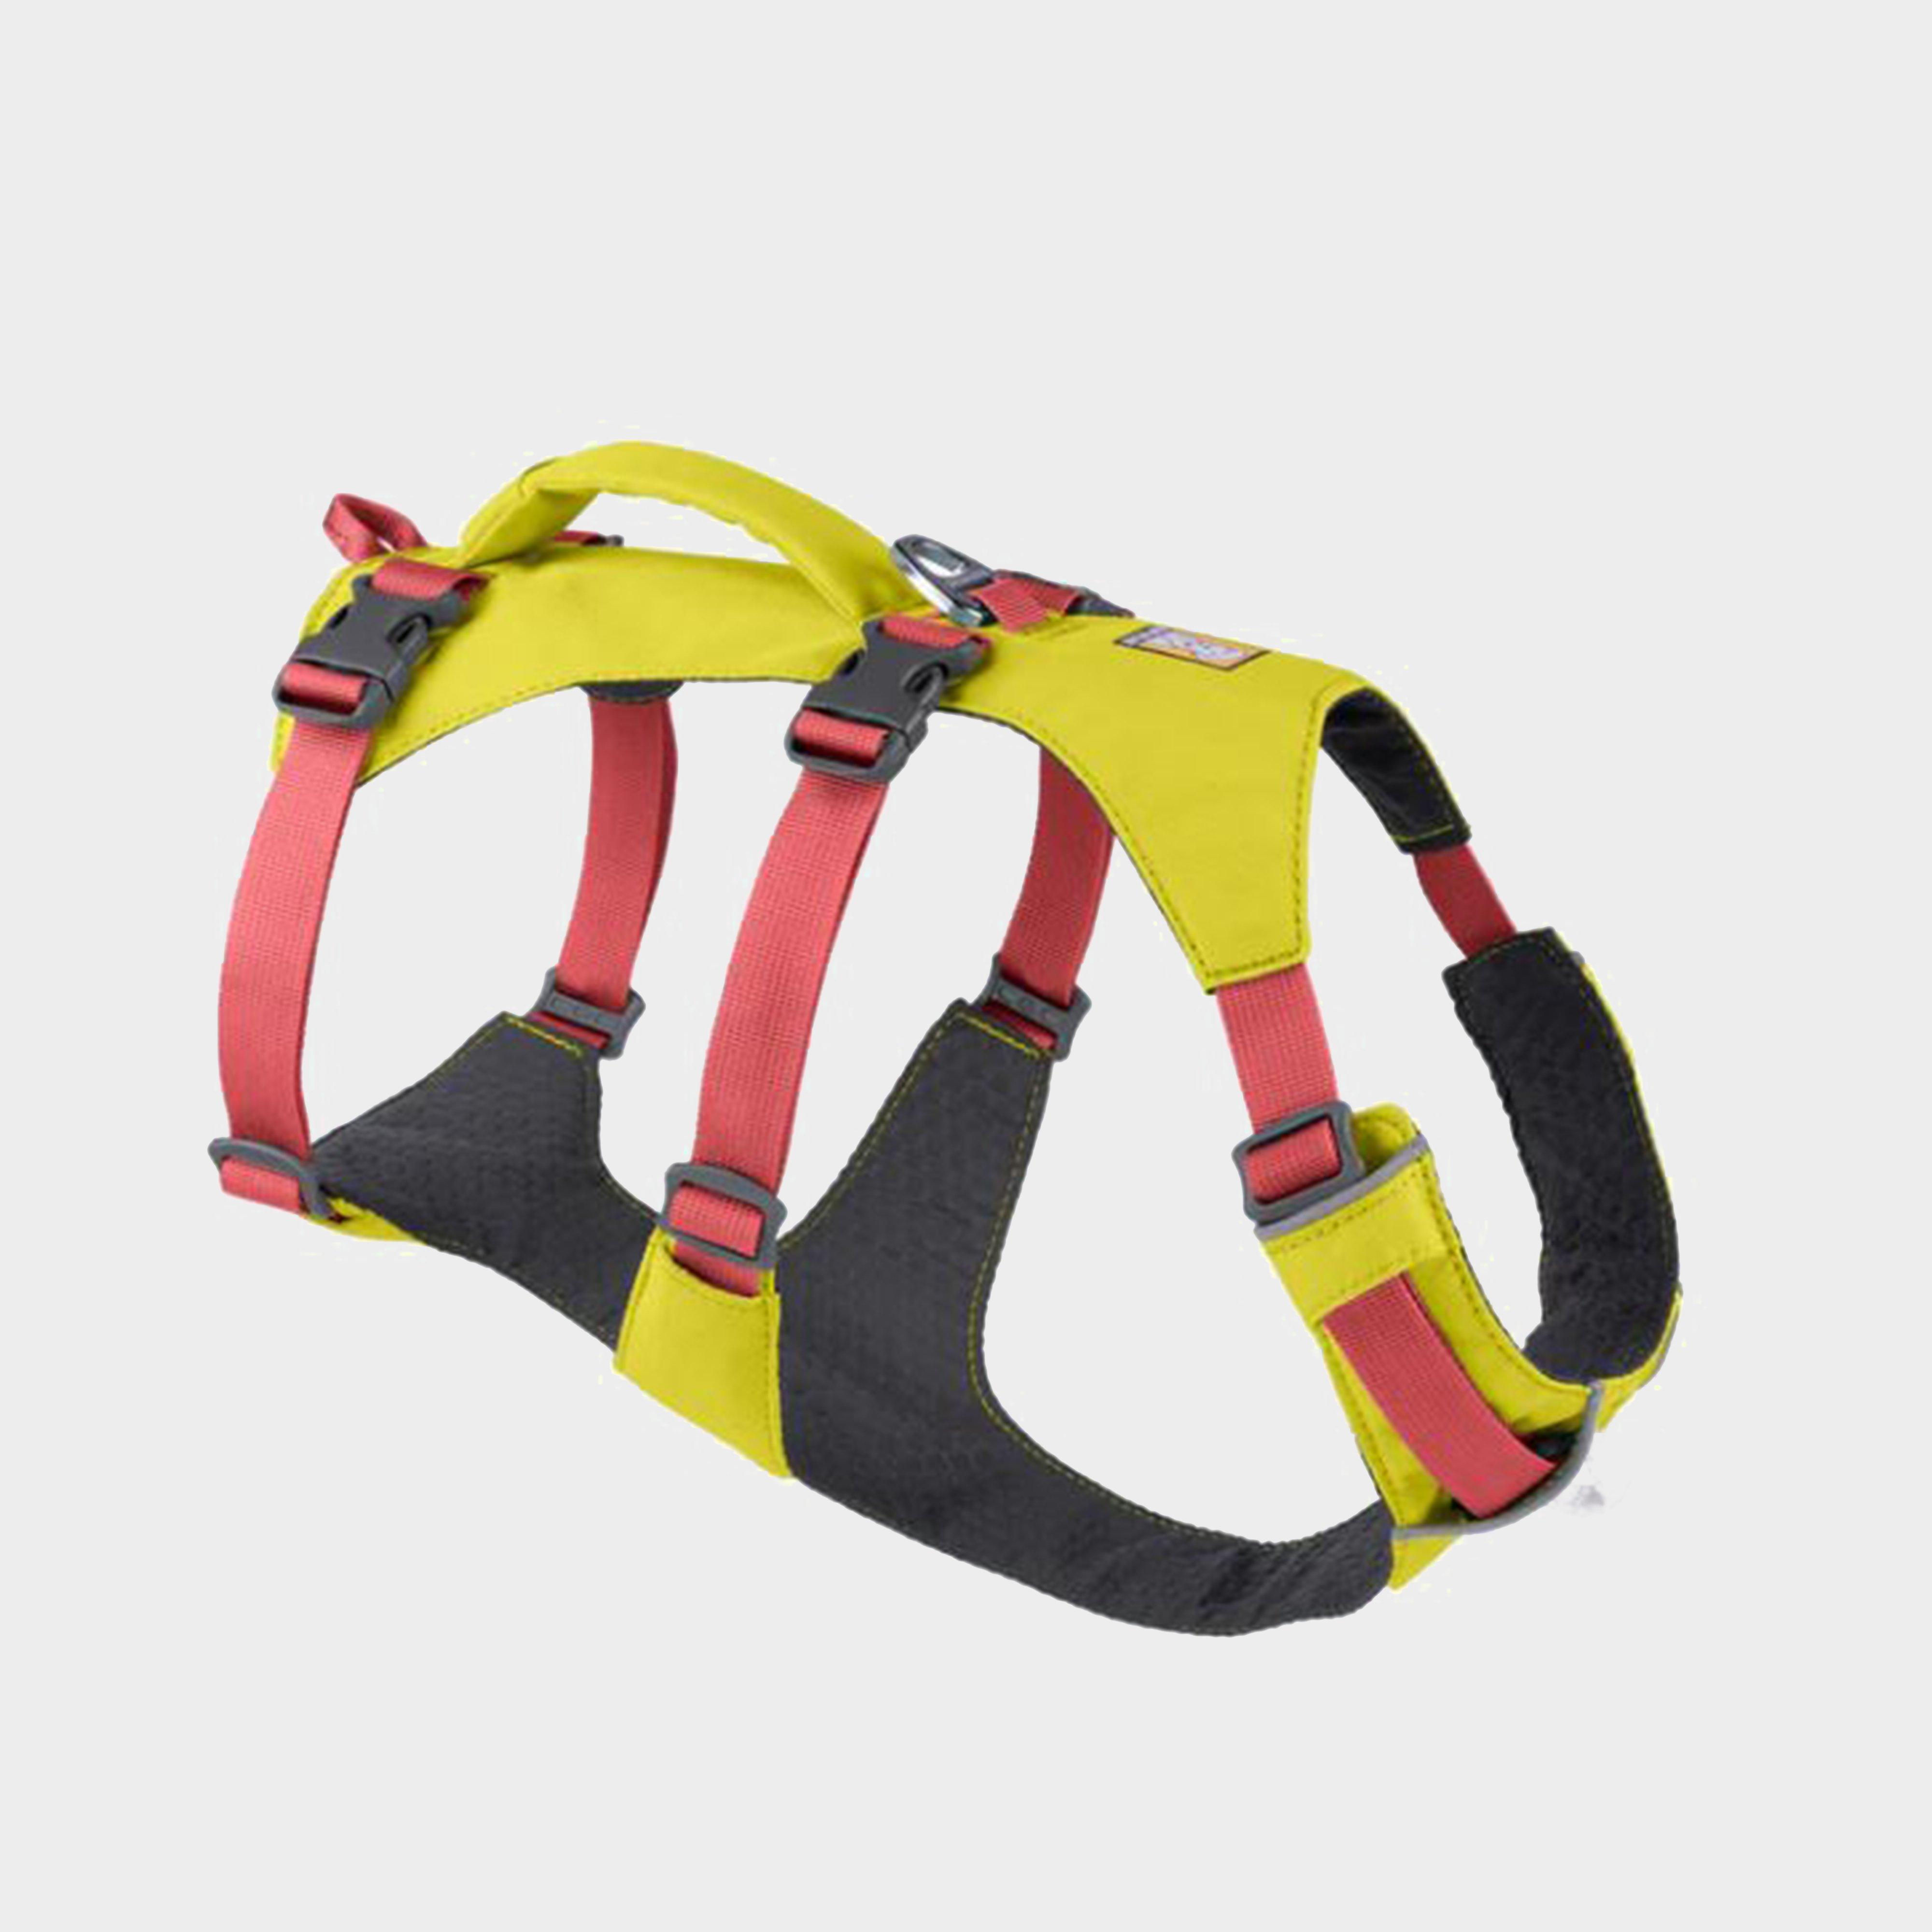 Photos - Collar / Harnesses Ruffwear Flagline Harness With Handle Yellow/Red, Green 